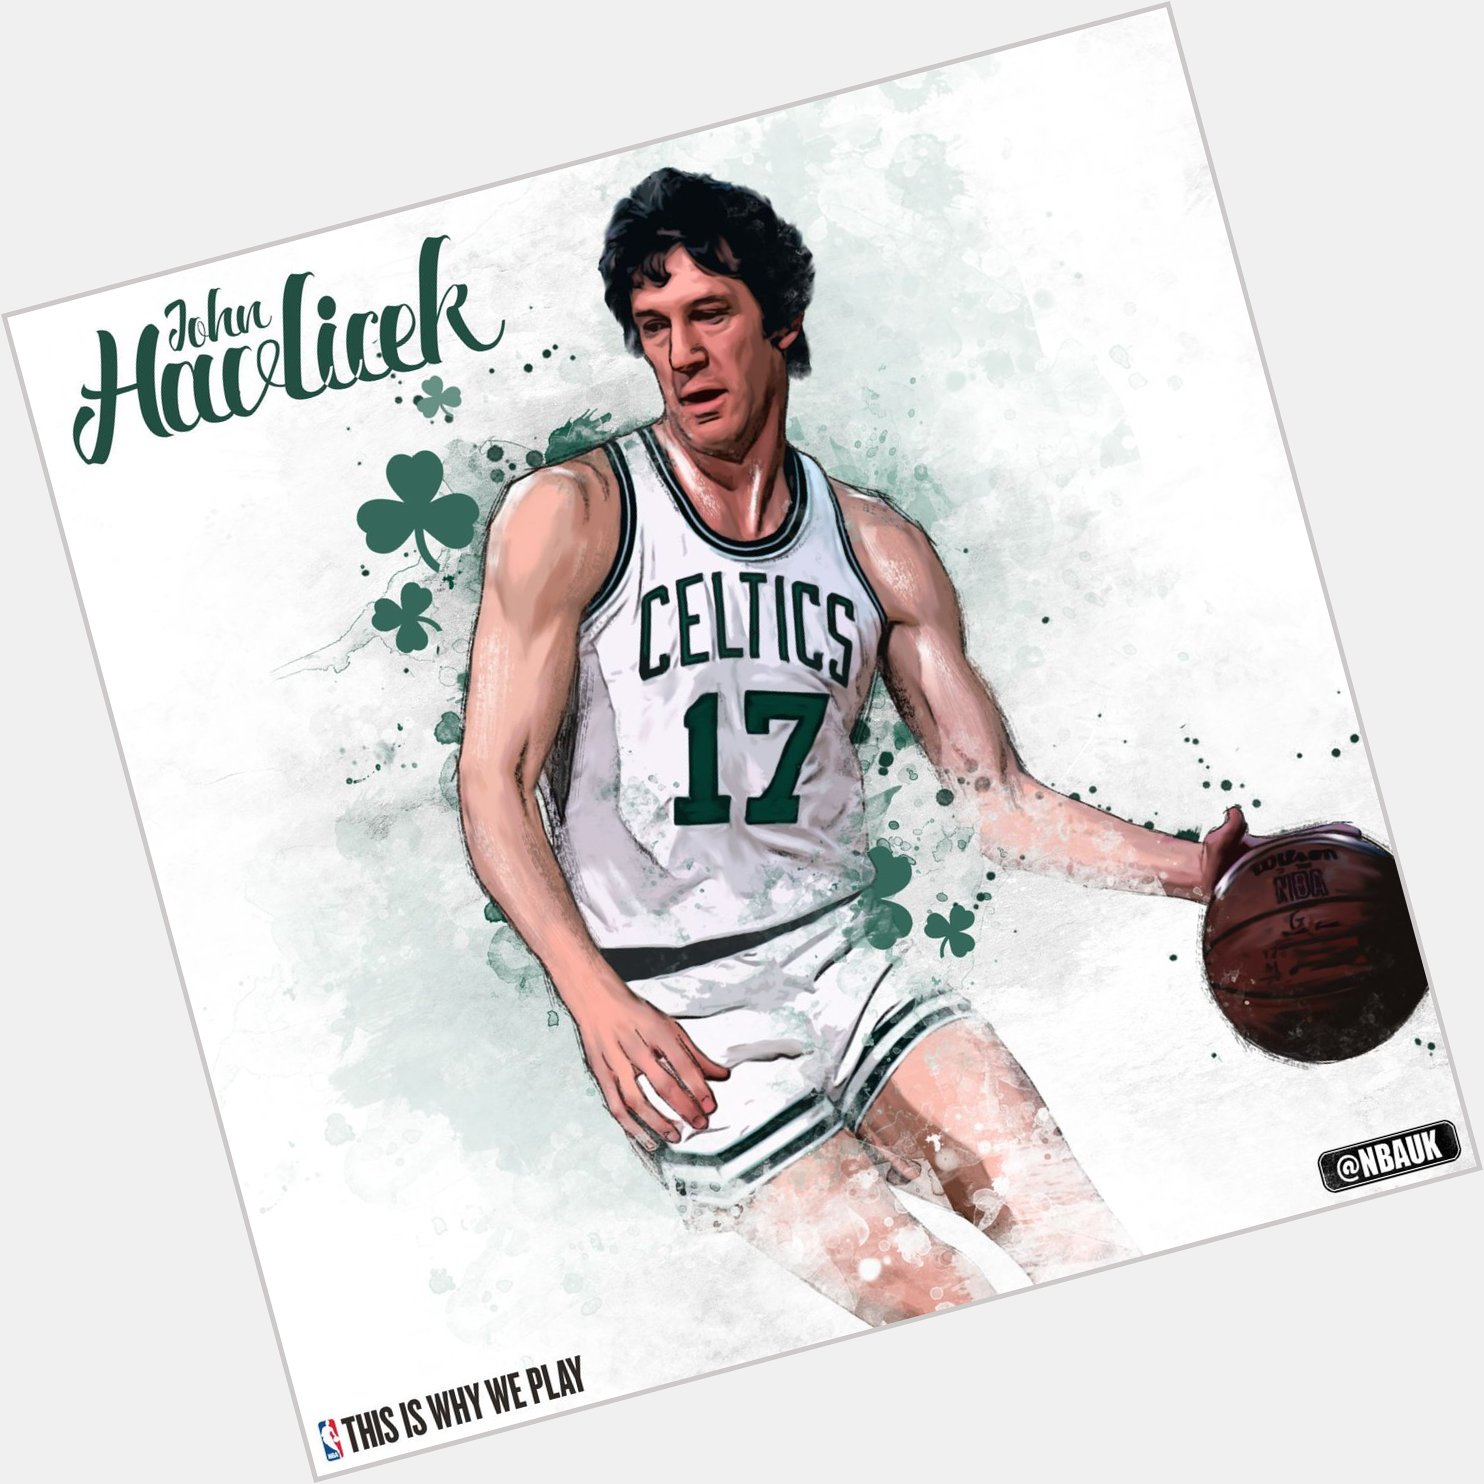 Join us in wishing 13x NBA All-Star, 8x NBA Champion and legend John Havlicek a very happy birthday! 